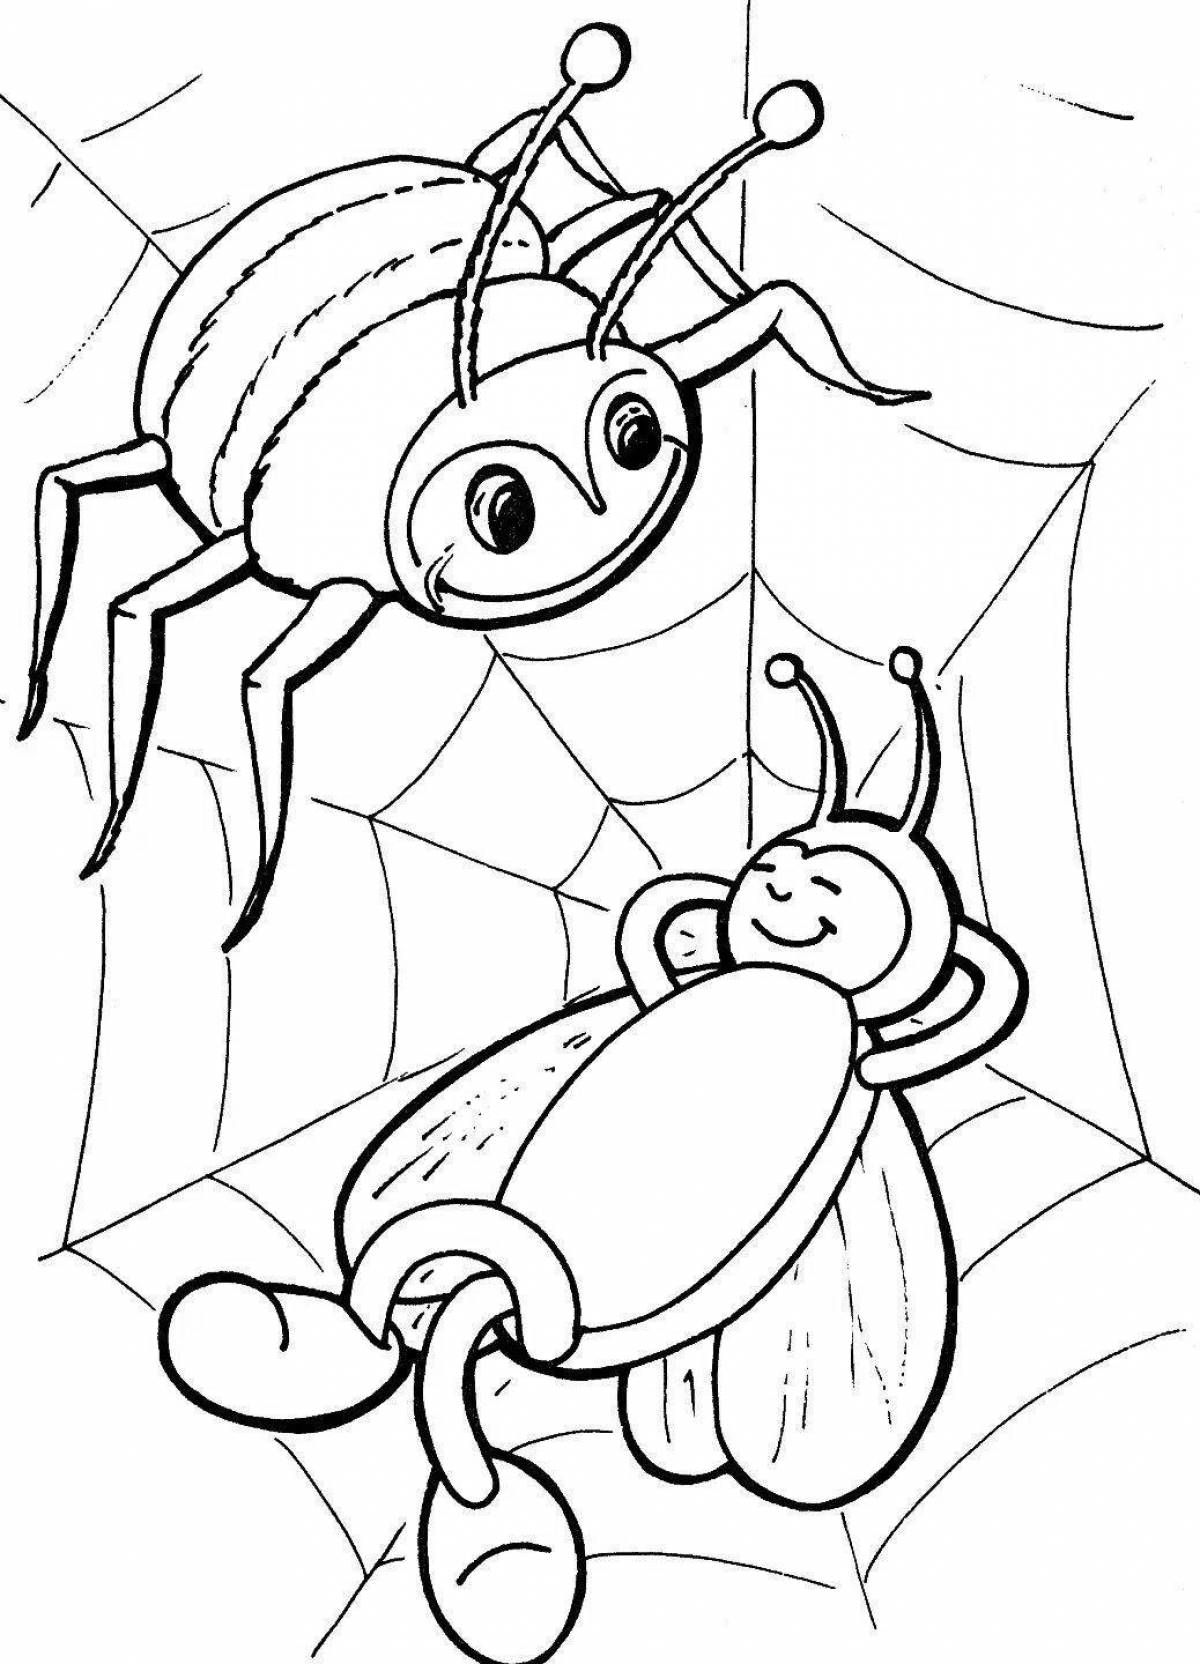 Incredible coloring book insects